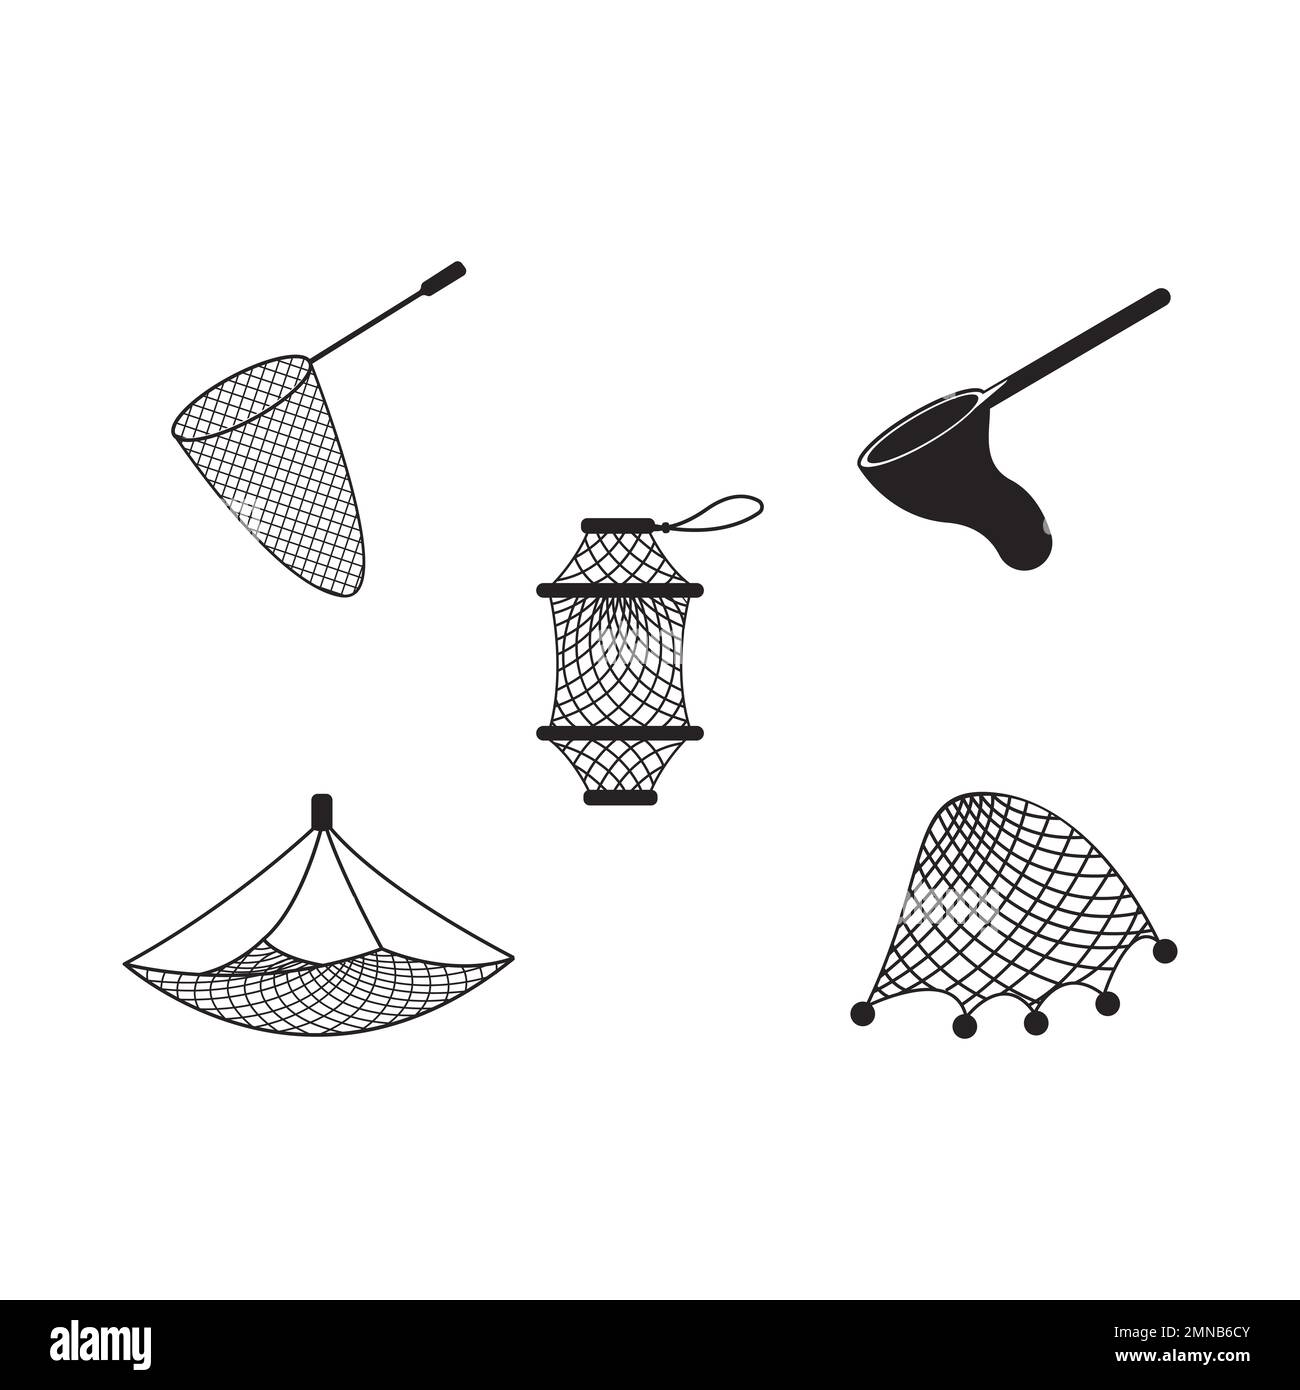 Fishing hunting net icon Stock Vector Images - Page 2 - Alamy